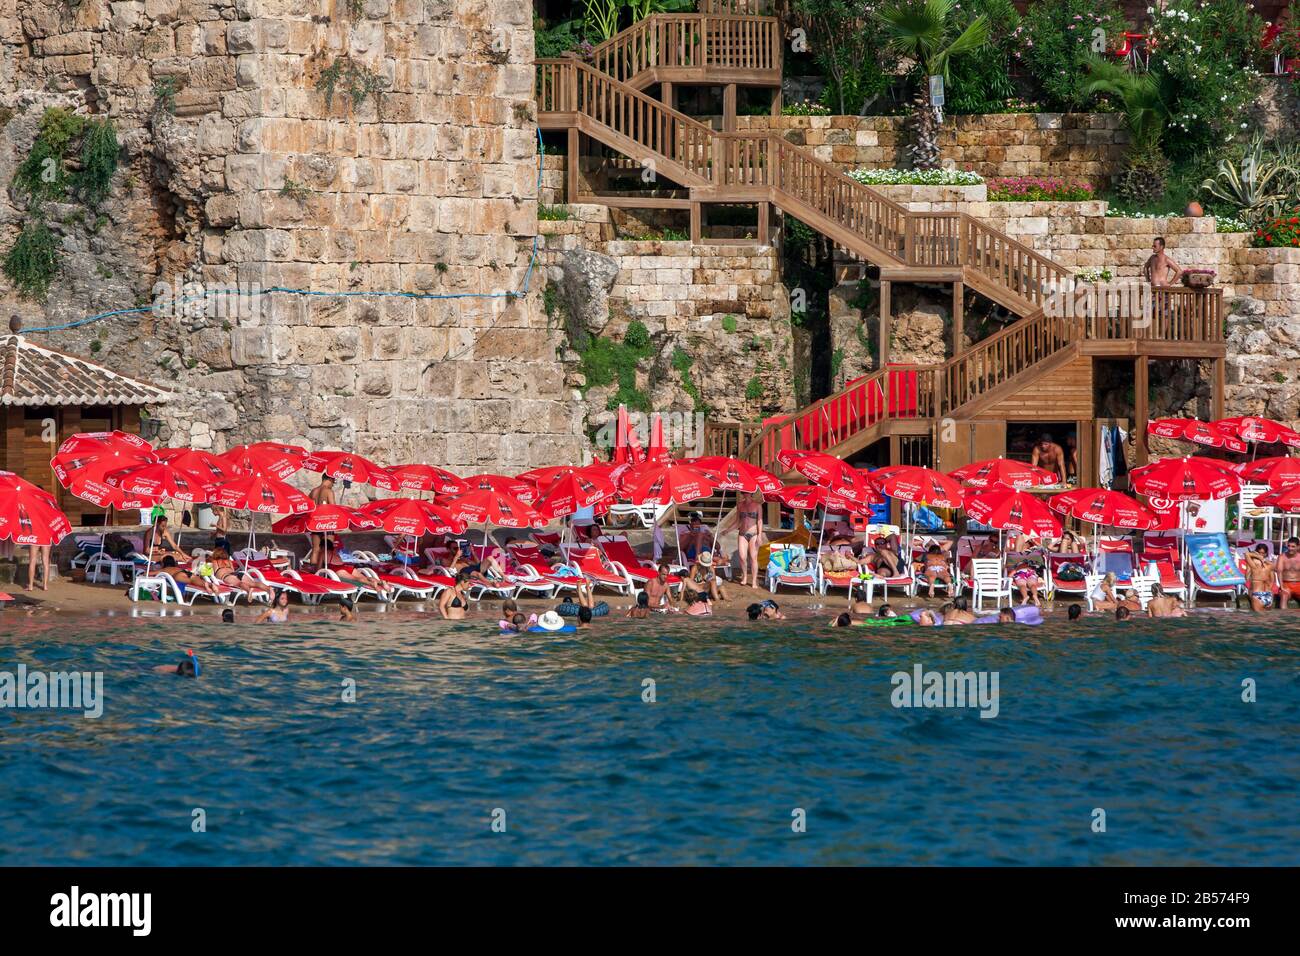 People enjoy bathing at Mermerli Plaji adjacent to the ancient Roman Harbour walls at Kaleici on Antalya  Bay in Turkey on a hot summers day. Stock Photo